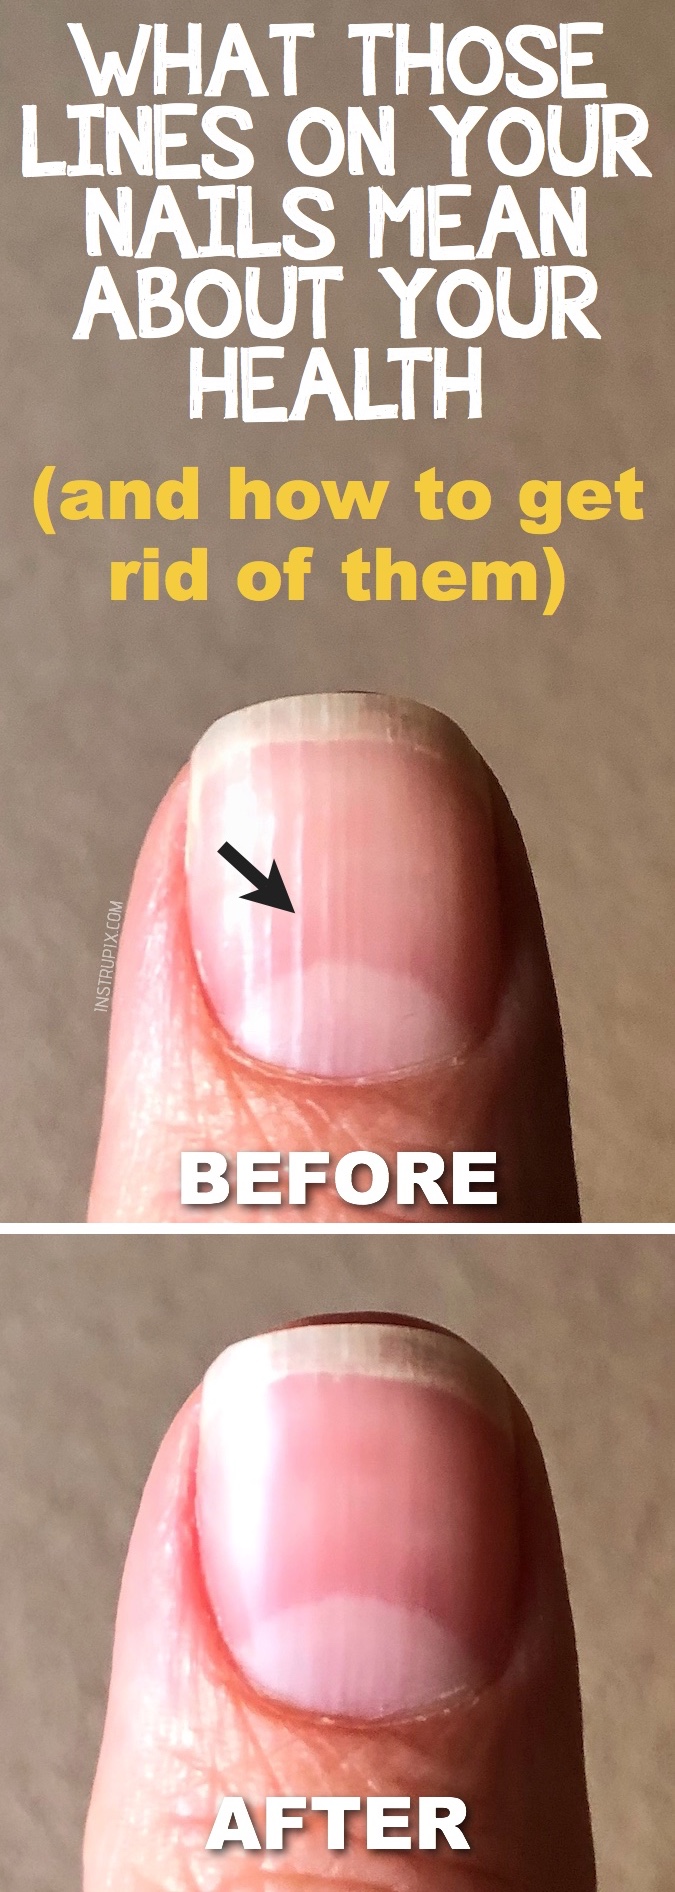 What are those vertical lines on your nails, and what it means about your health? Instrupix.com